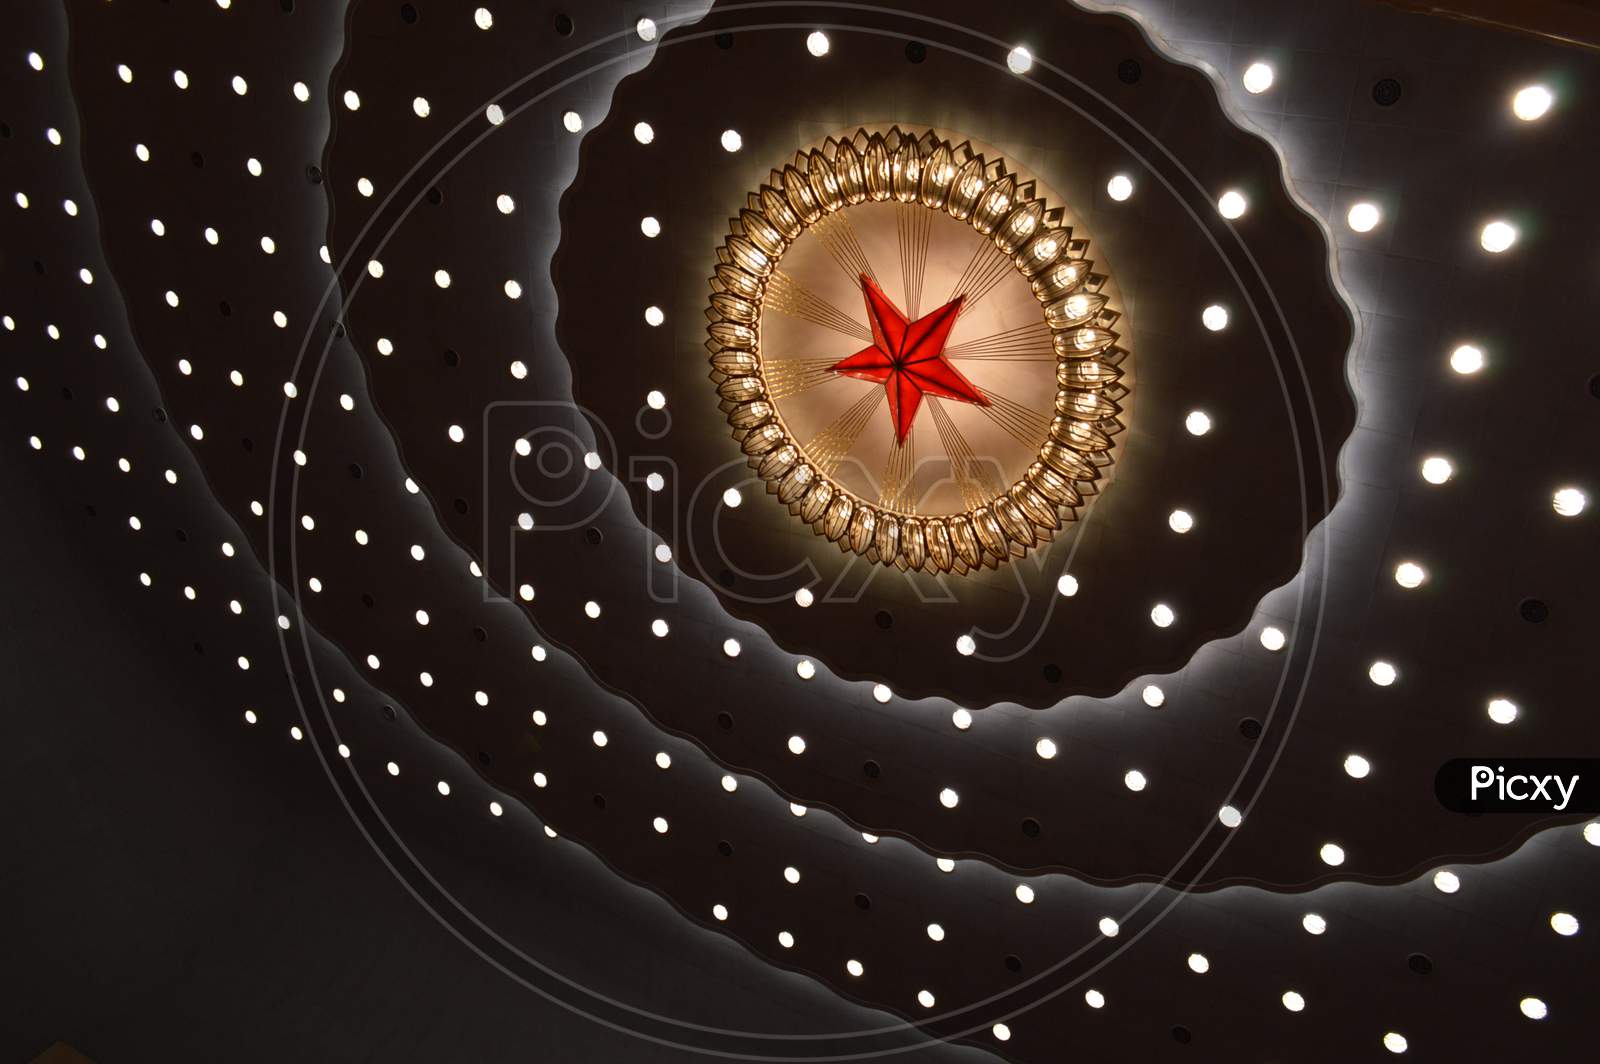 Ceiling Of The Main Auditorium Of The Great Hall Of The People In Beijing, China